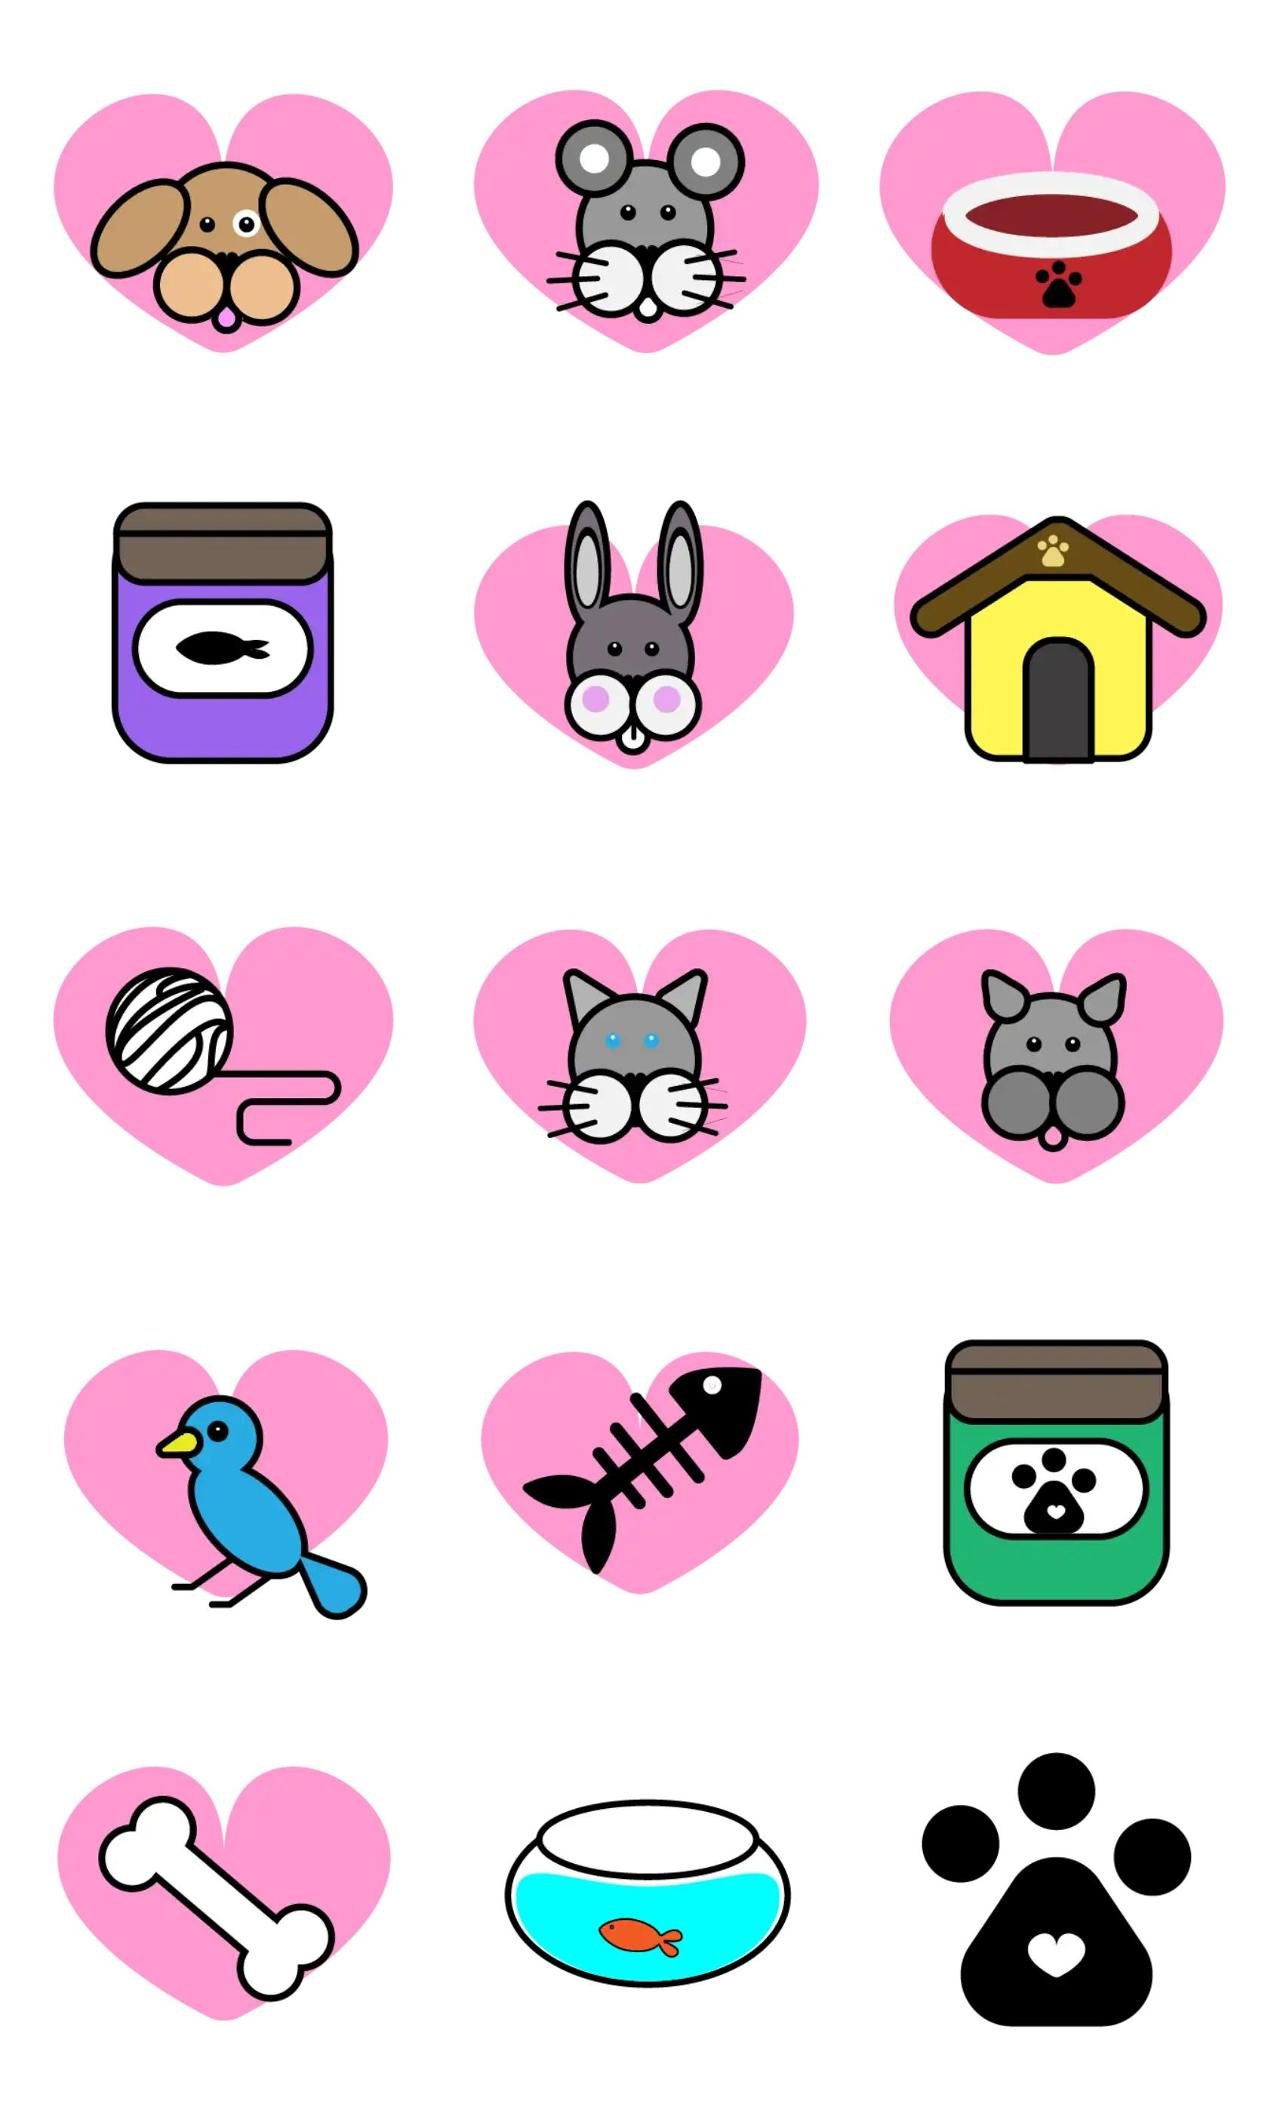 love pets Animation/Cartoon,Animals sticker pack for Whatsapp, Telegram, Signal, and others chatting and message apps